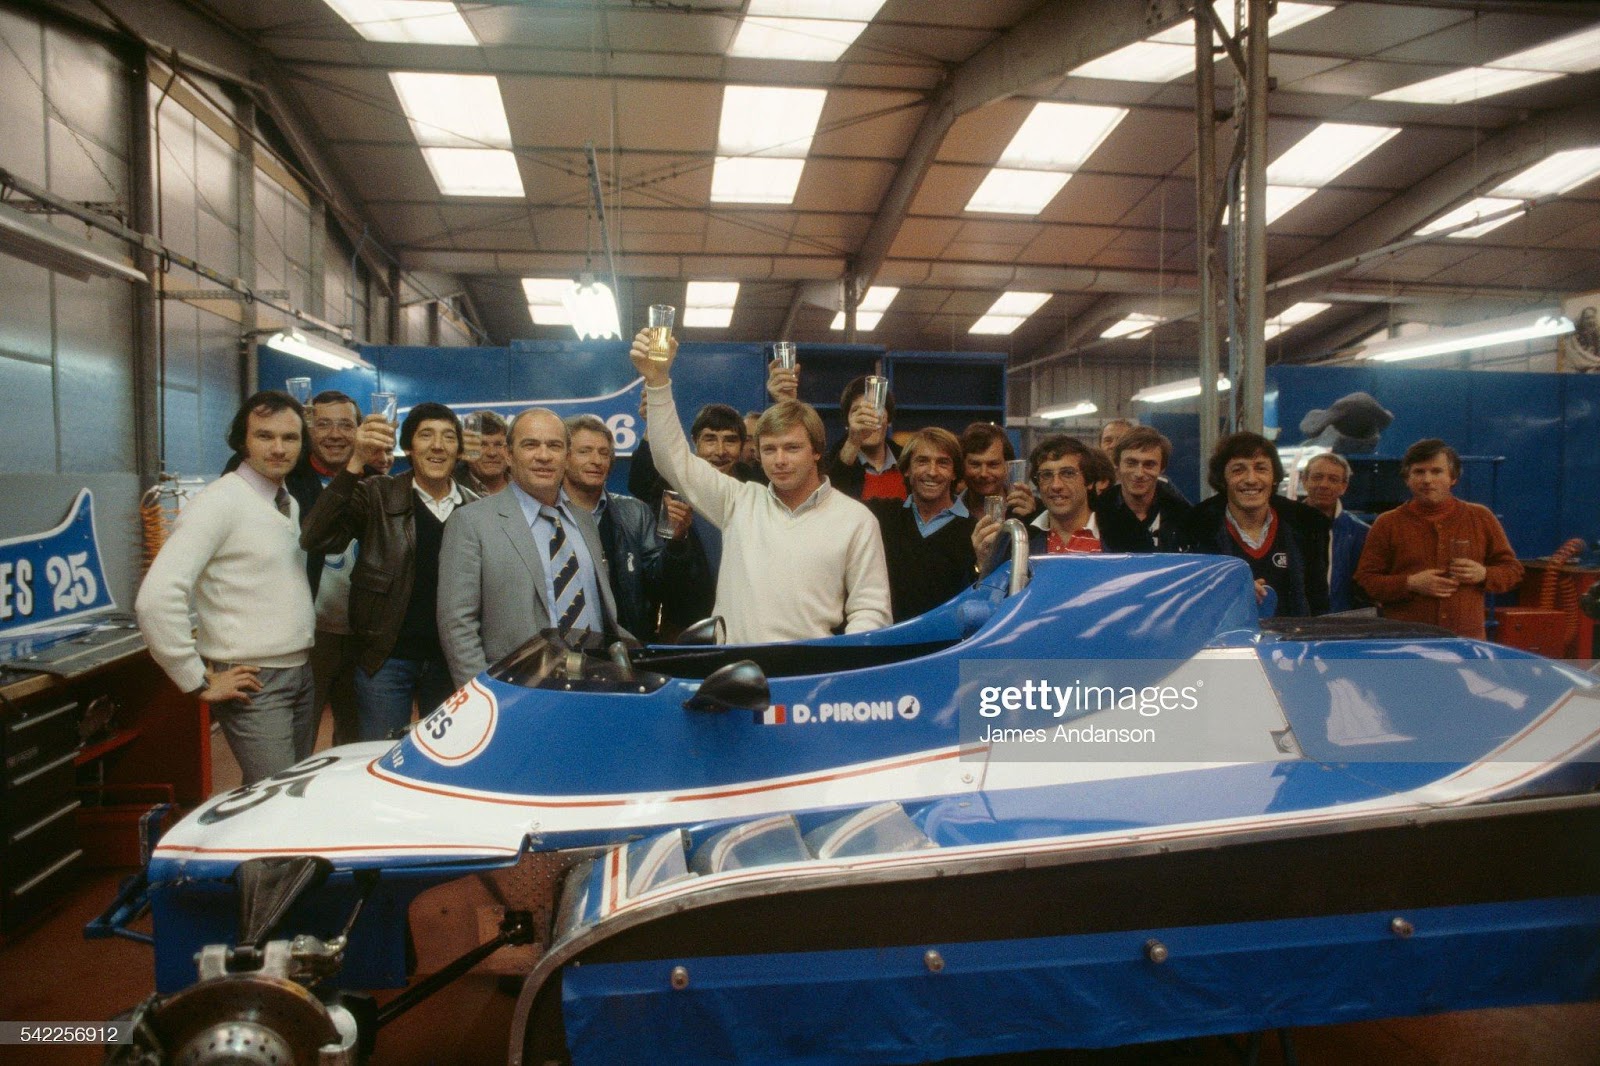 Didier Pironi celebrates victory in the Belgian Grand Prix in Zolder with Guy Ligier (striped tie) and Jacques Laffite (right) with mechanics from the Ligier team.